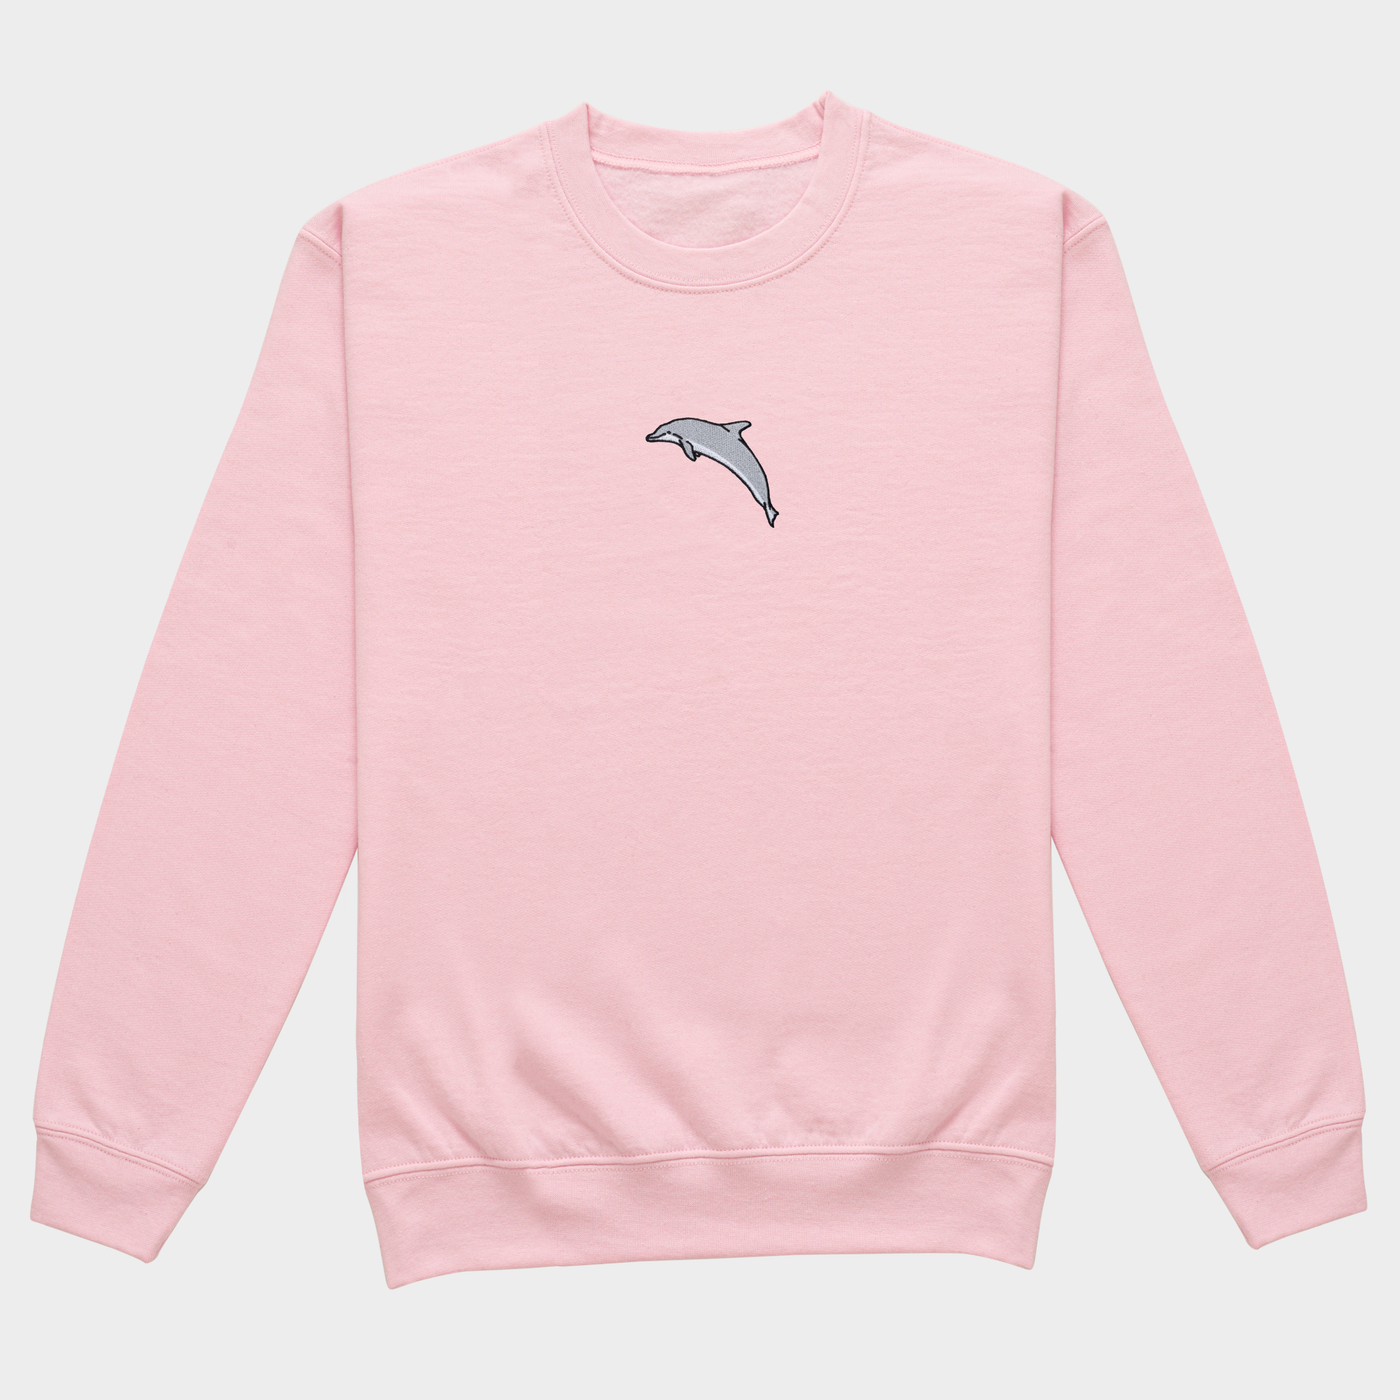 Bobby's Planet Women's Embroidered Dolphin Sweatshirt from Seven Seas Fish Animals Collection in Light Pink Color#color_light-pink